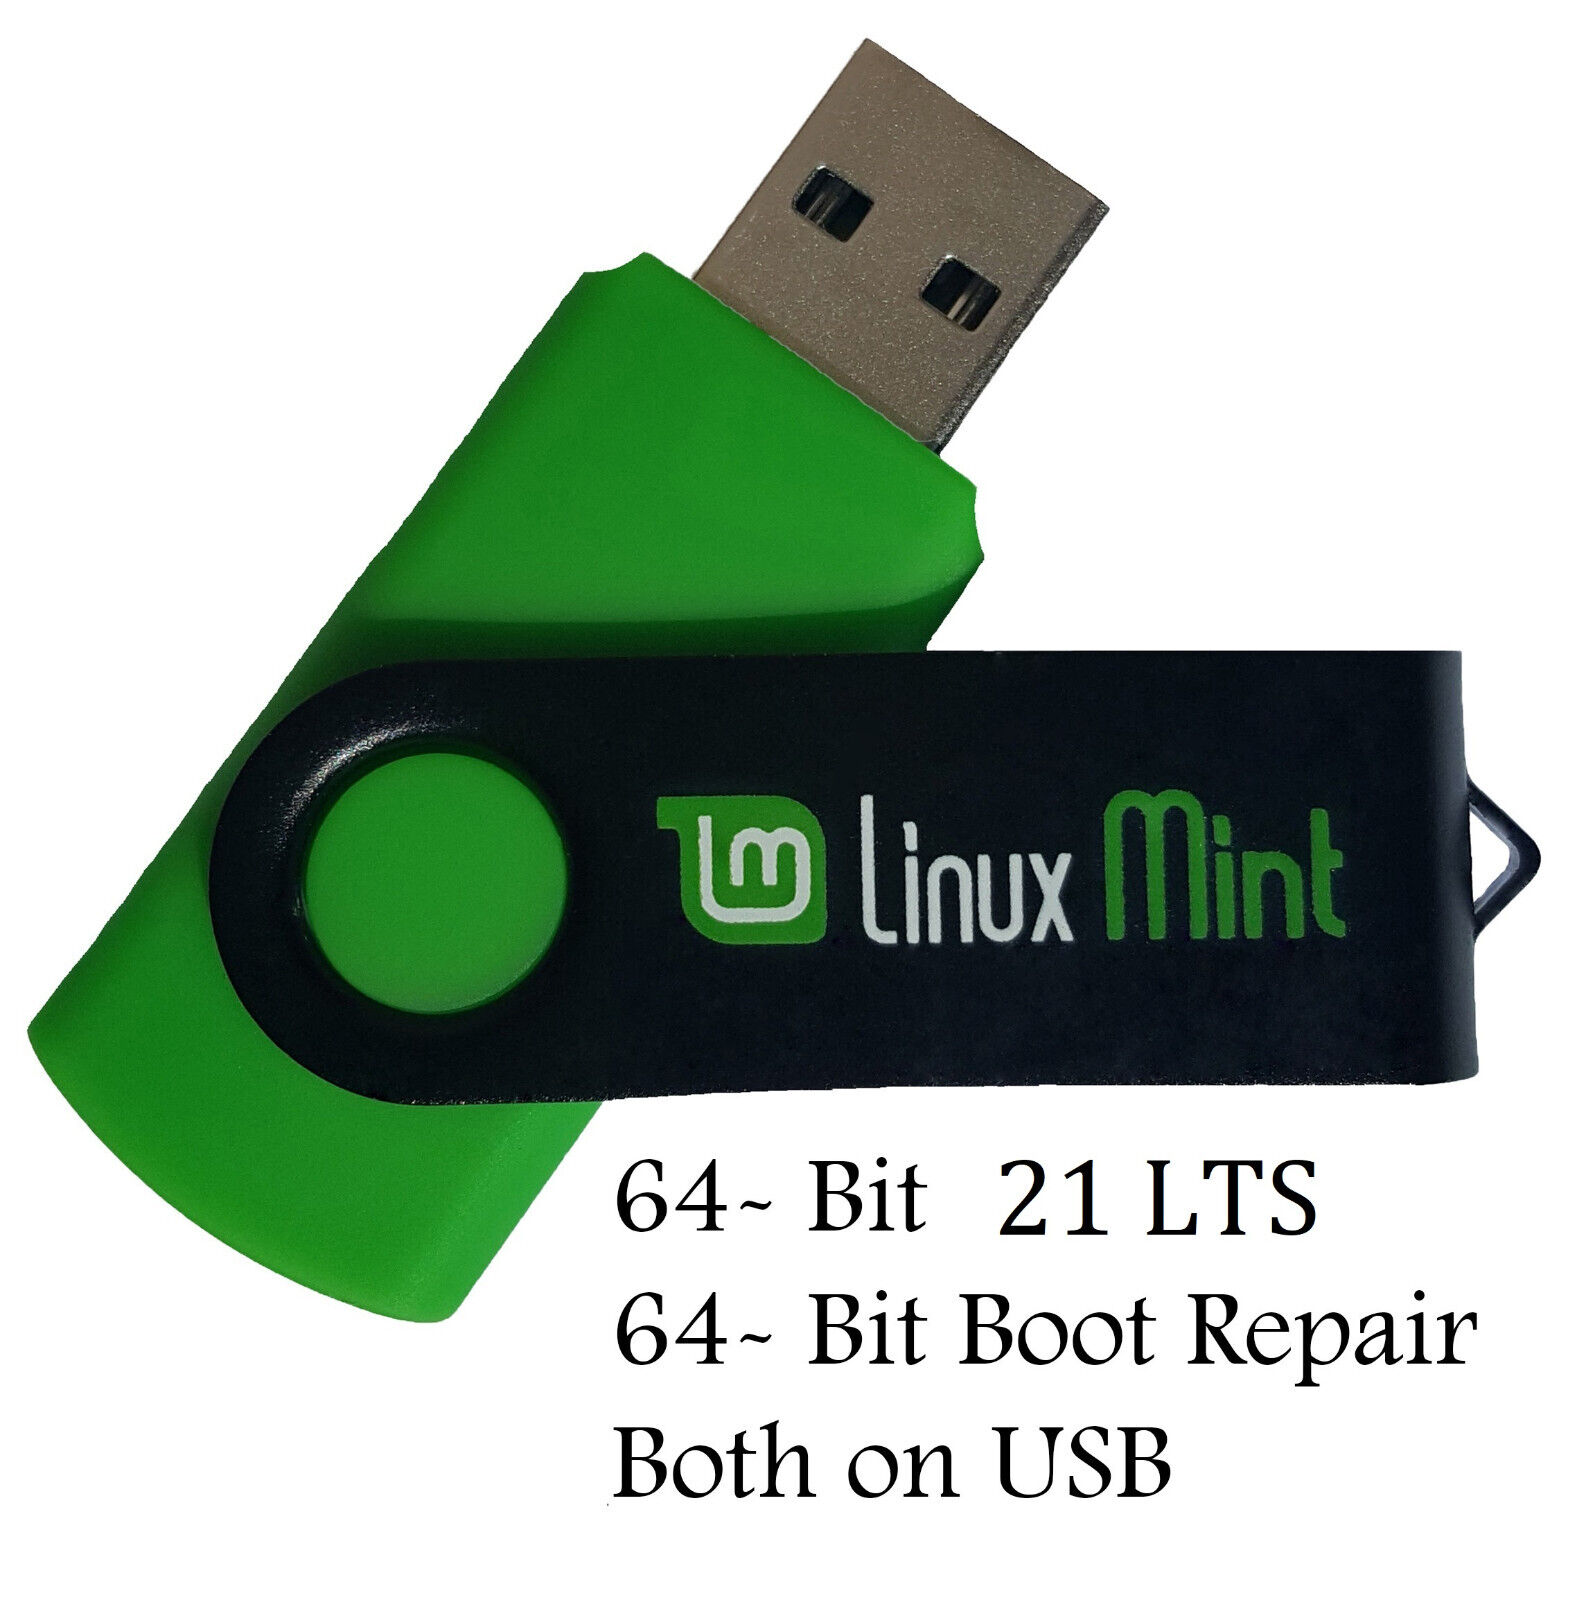 Linux Mint 21 LTS 64 Bit Bootable 8GB USB Flash Drive And Install Guide